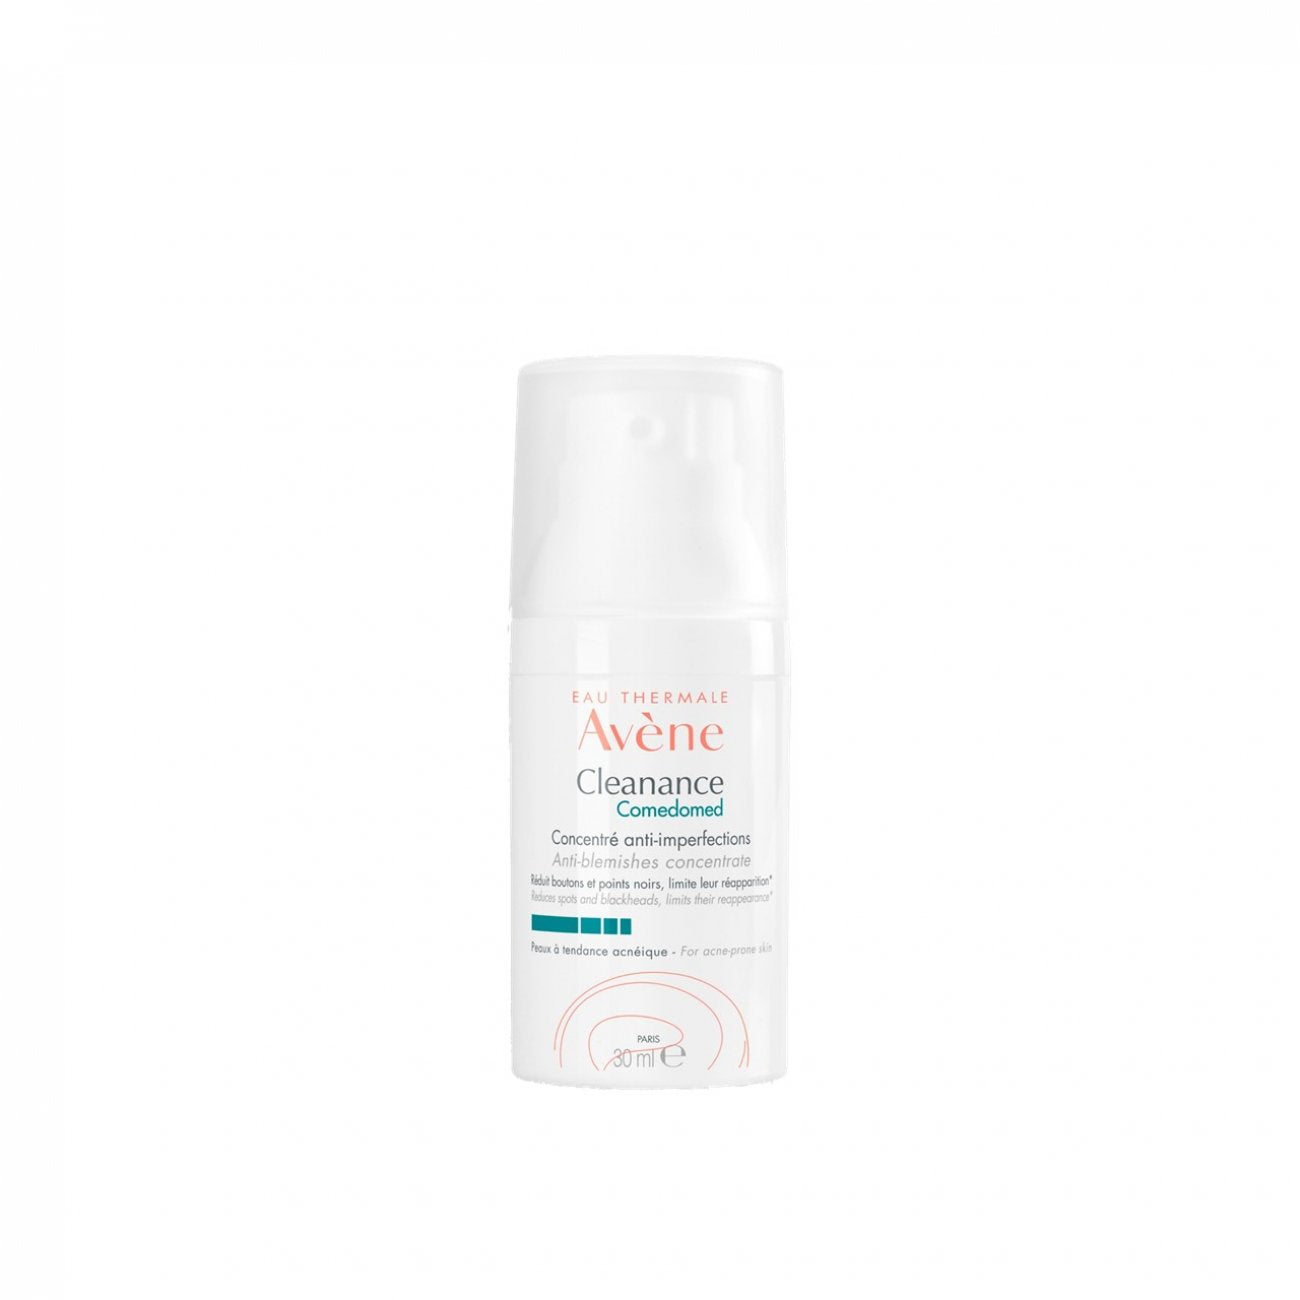 Avène Cleanance Comedomed Cream Imperfections Acne Blackheads 30ml